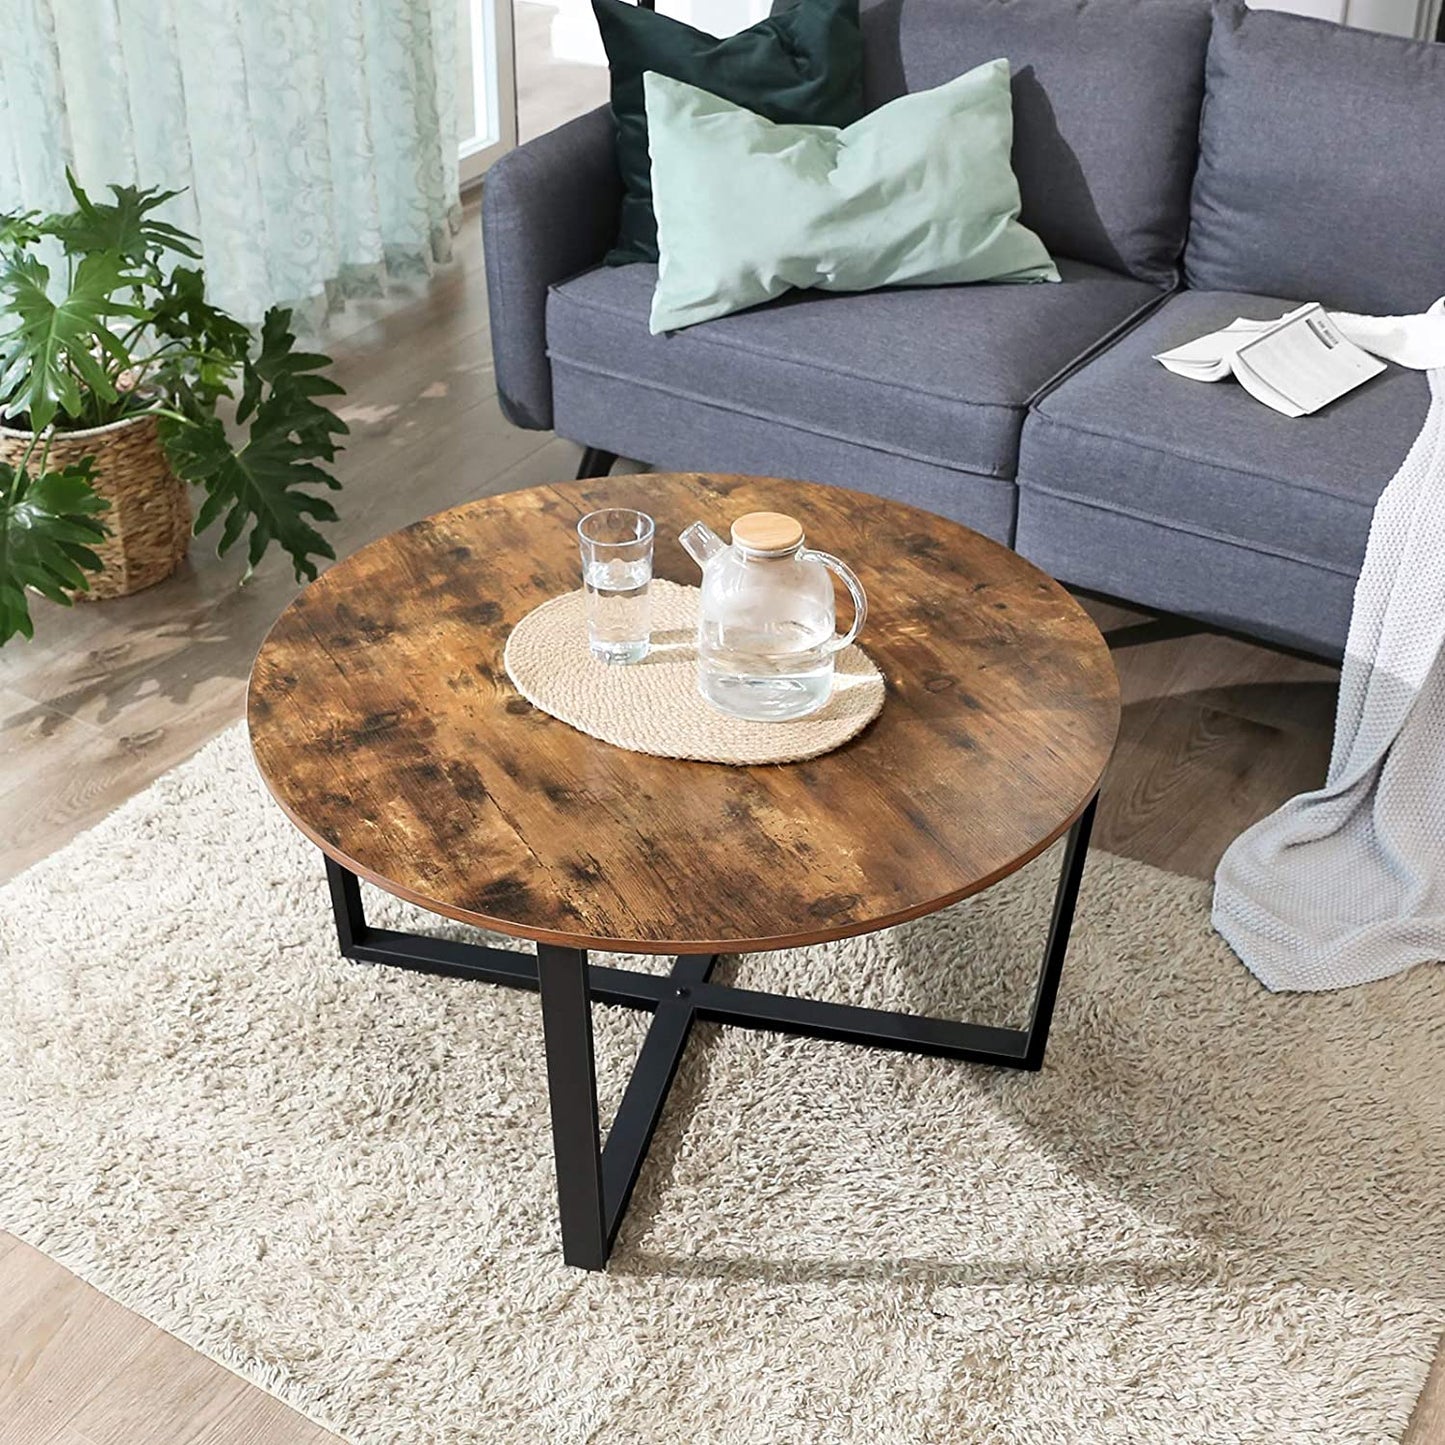 Round Coffee Table Rustic Brown and Black - image2